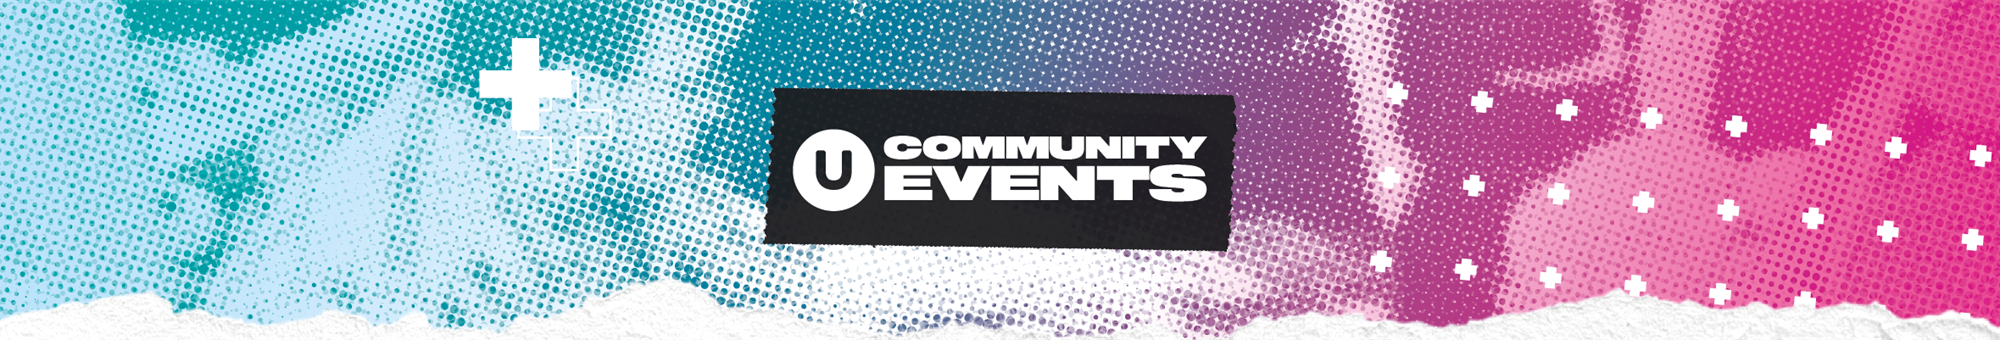 Get involved with our free events and activities –&nbsp;here you'll find the Community Events we have planned for Term 2.